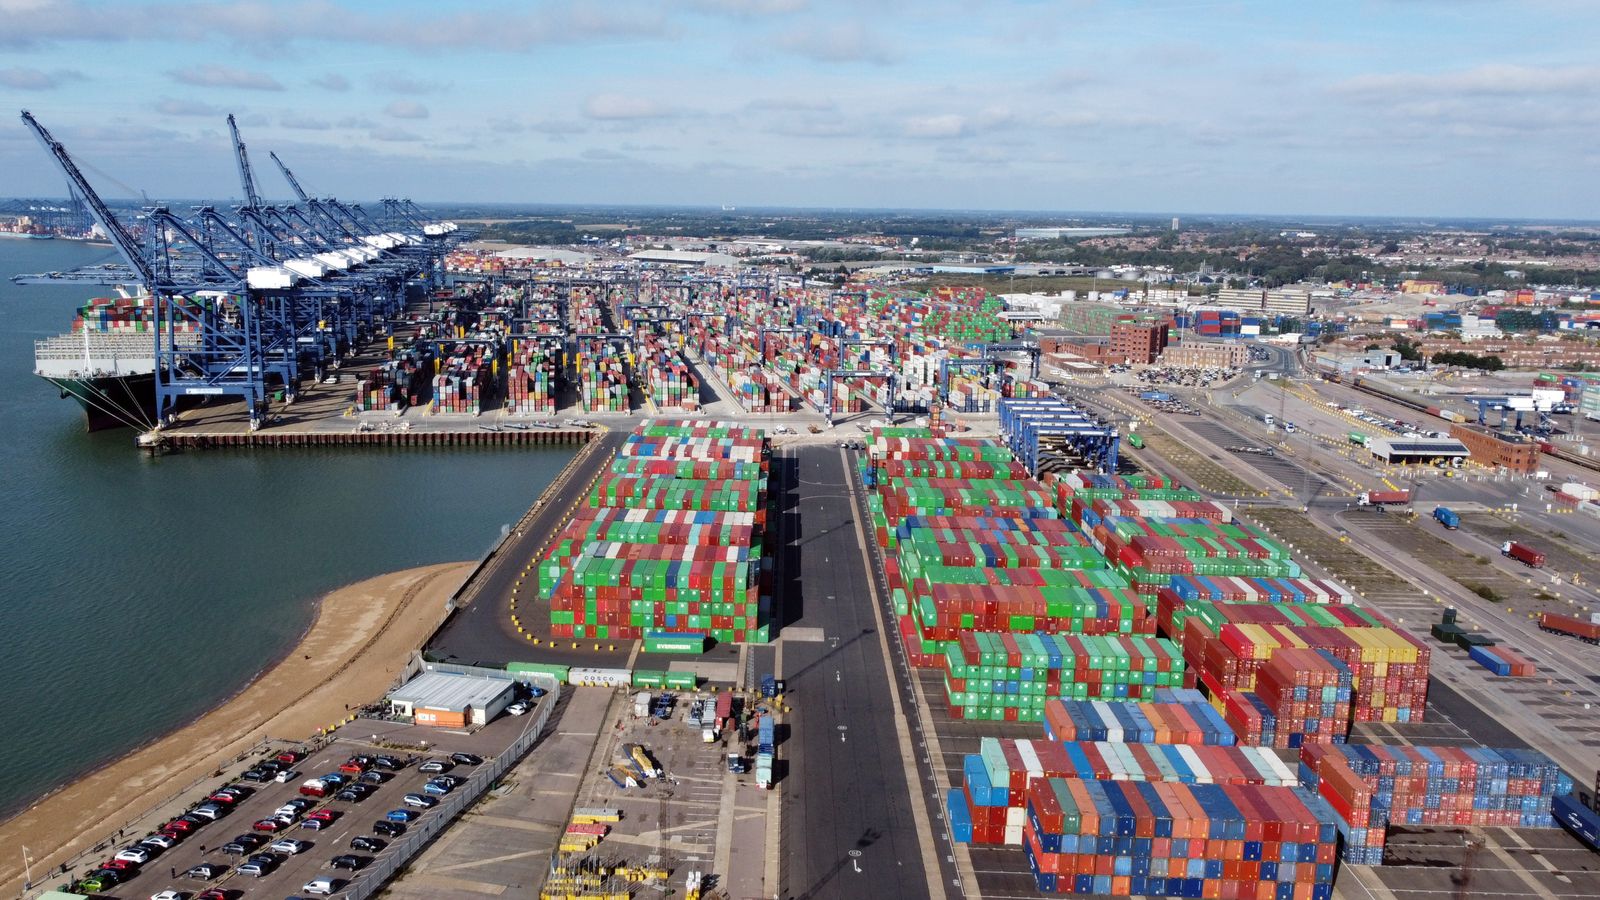 Almost 2,000 Felixstowe port workers to begin eight-day strike over pay, raising fears of supply chain disruption